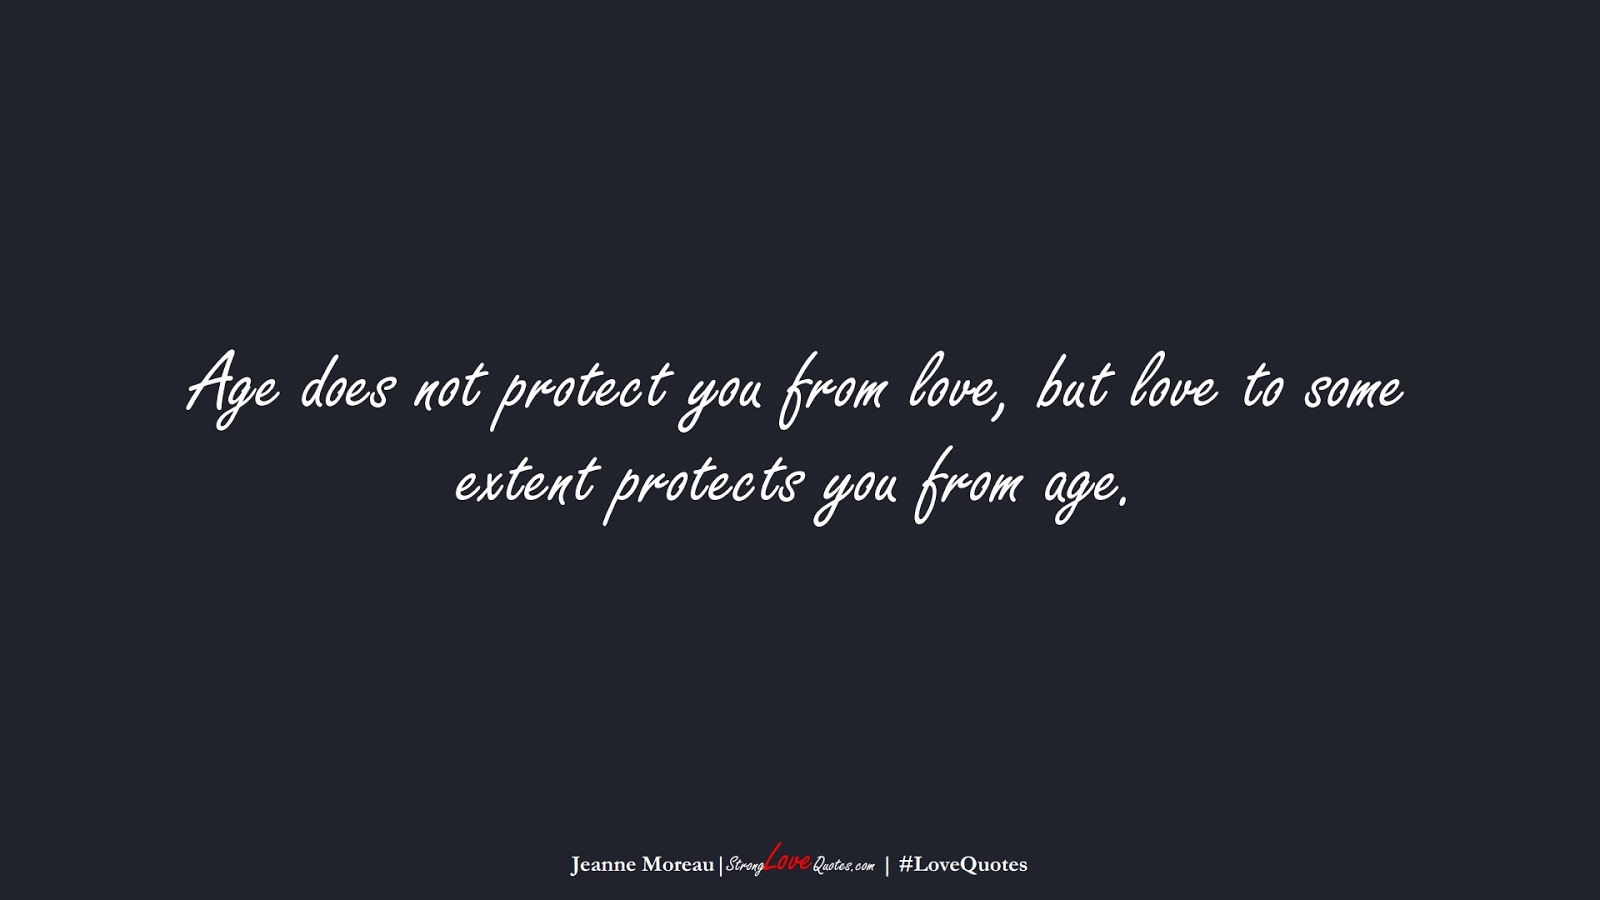 Age does not protect you from love, but love to some extent protects you from age. (Jeanne Moreau);  #LoveQuotes